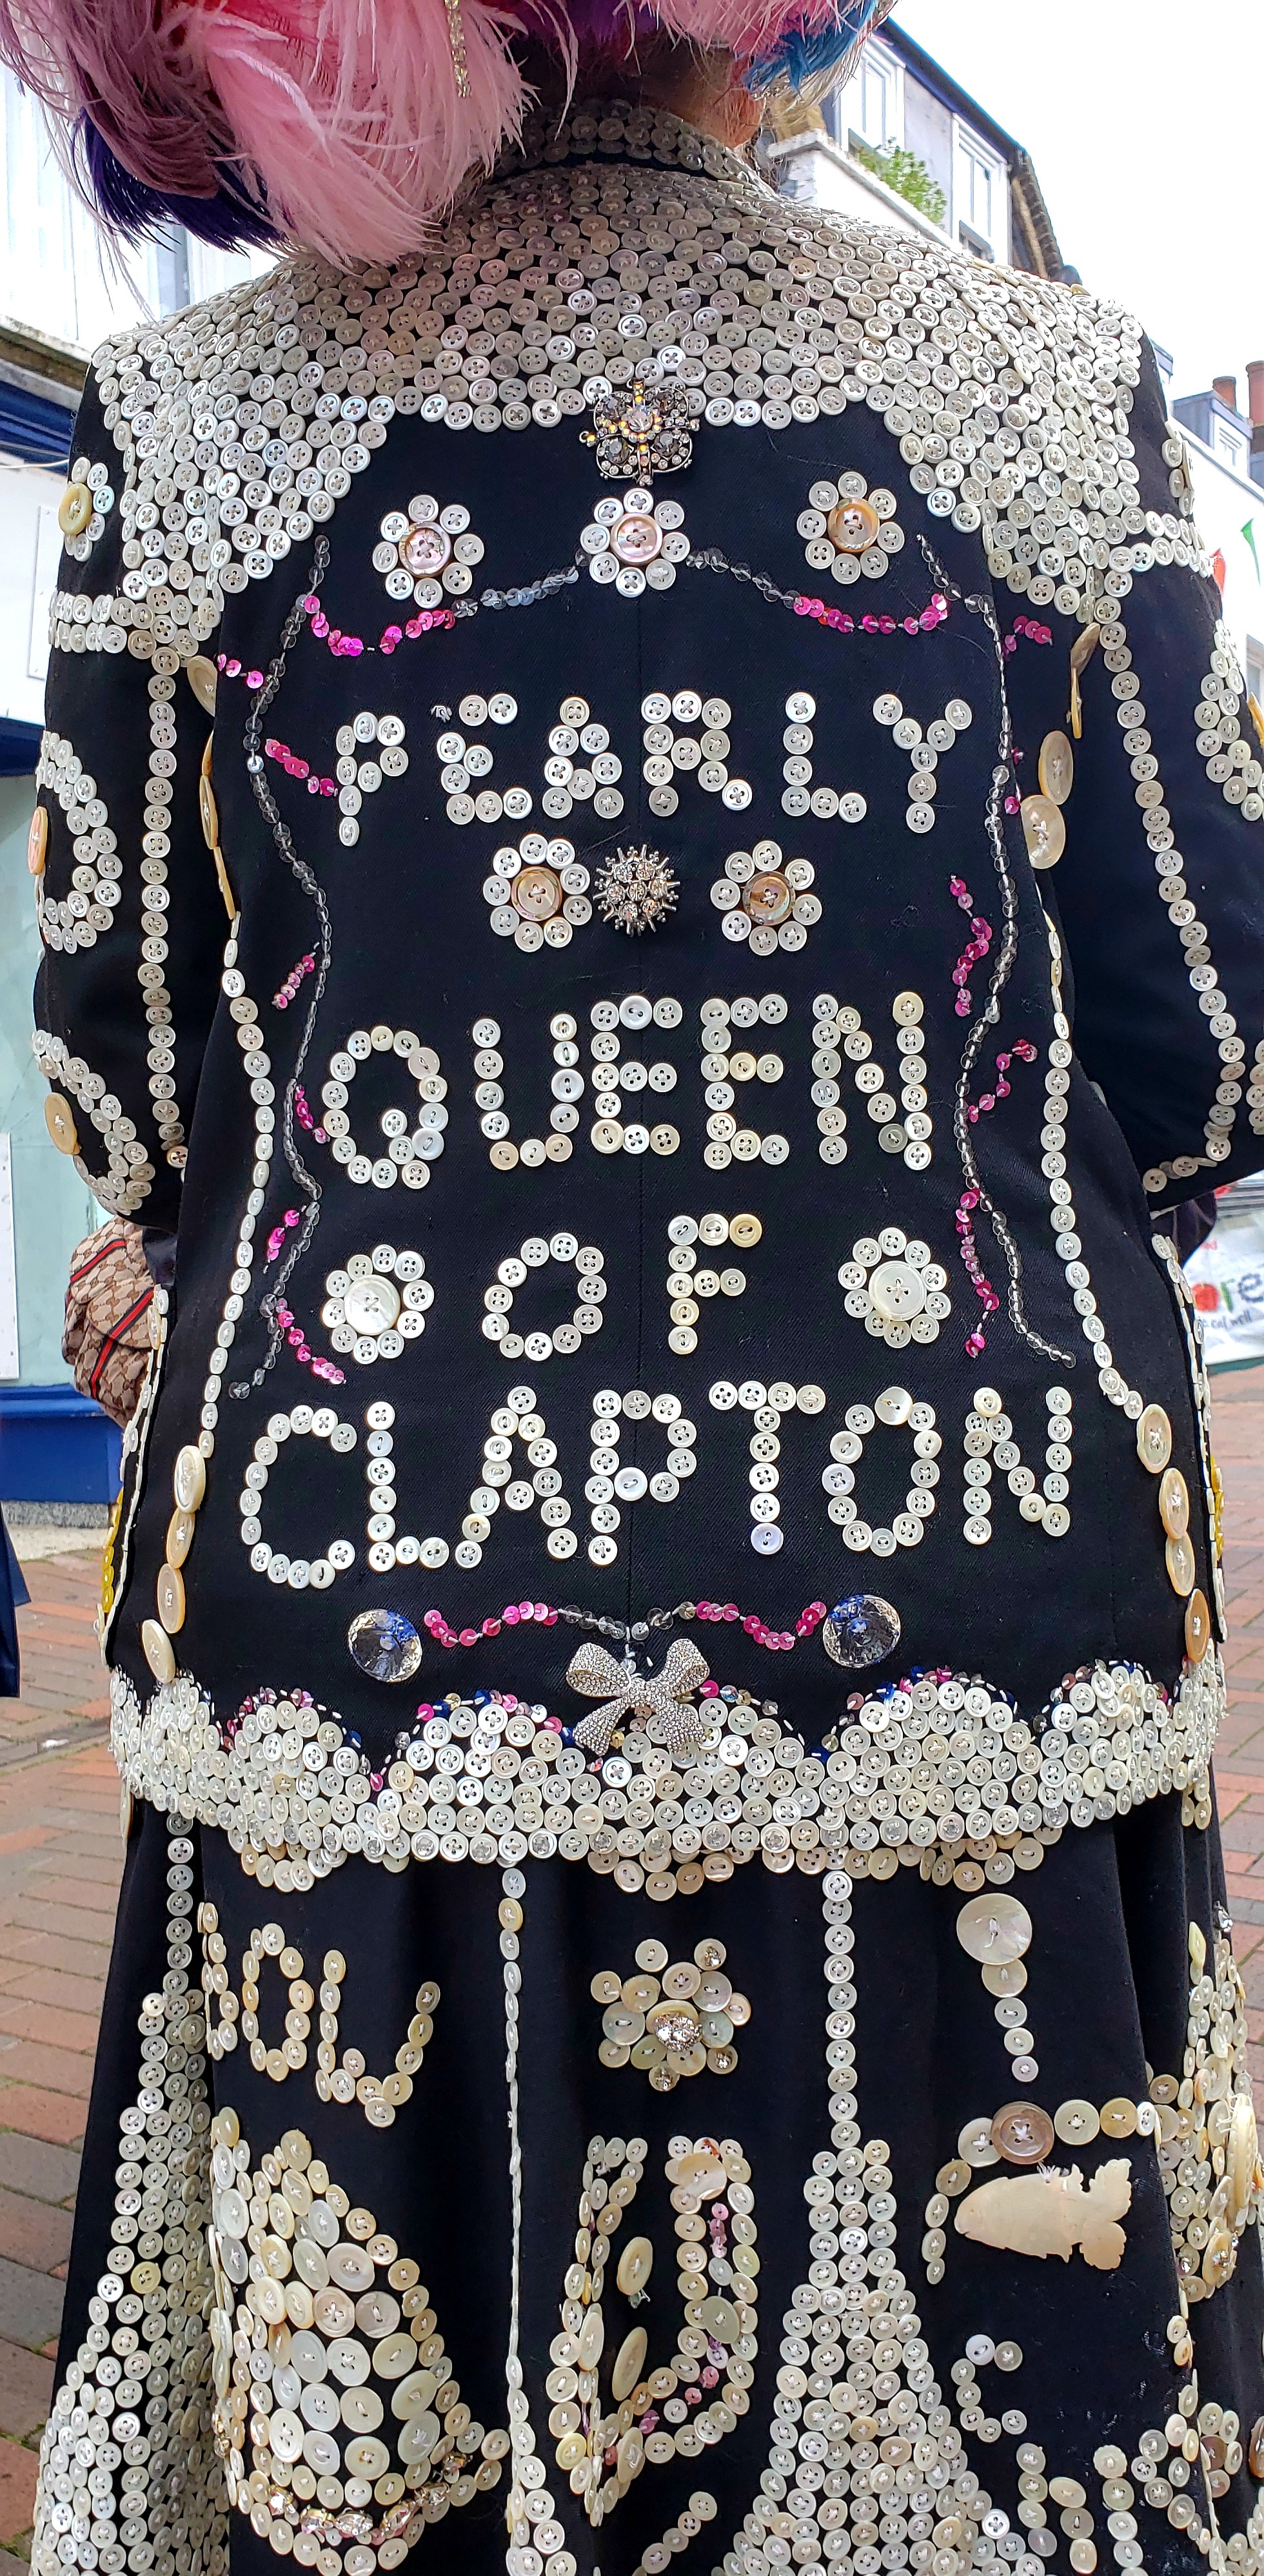 The Pearly Queen of Clapton